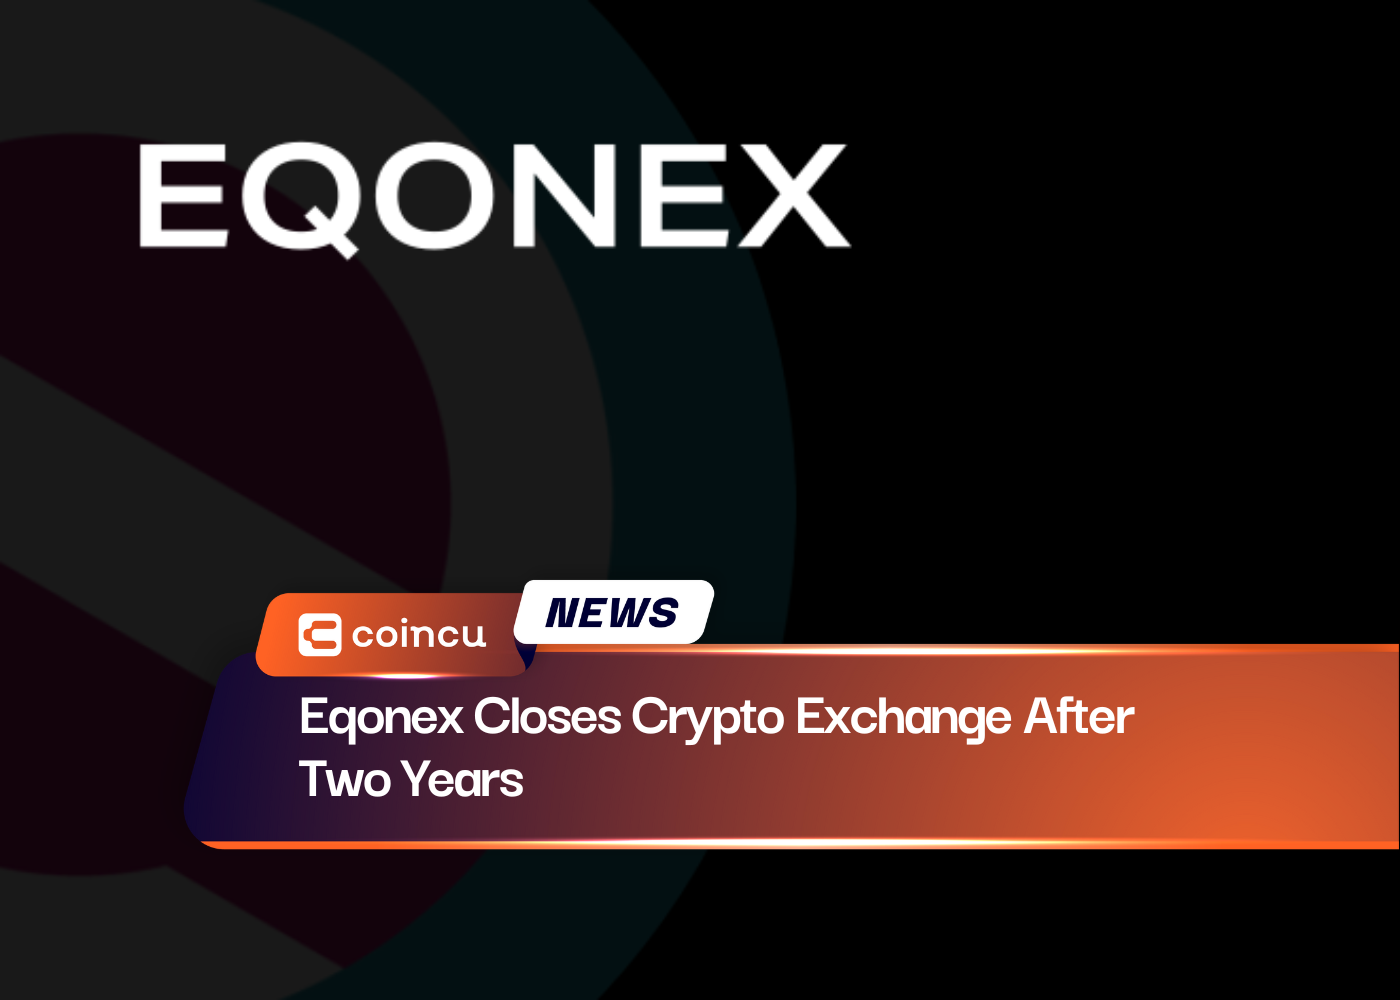 Eqonex Closes Crypto Exchange After Two Years